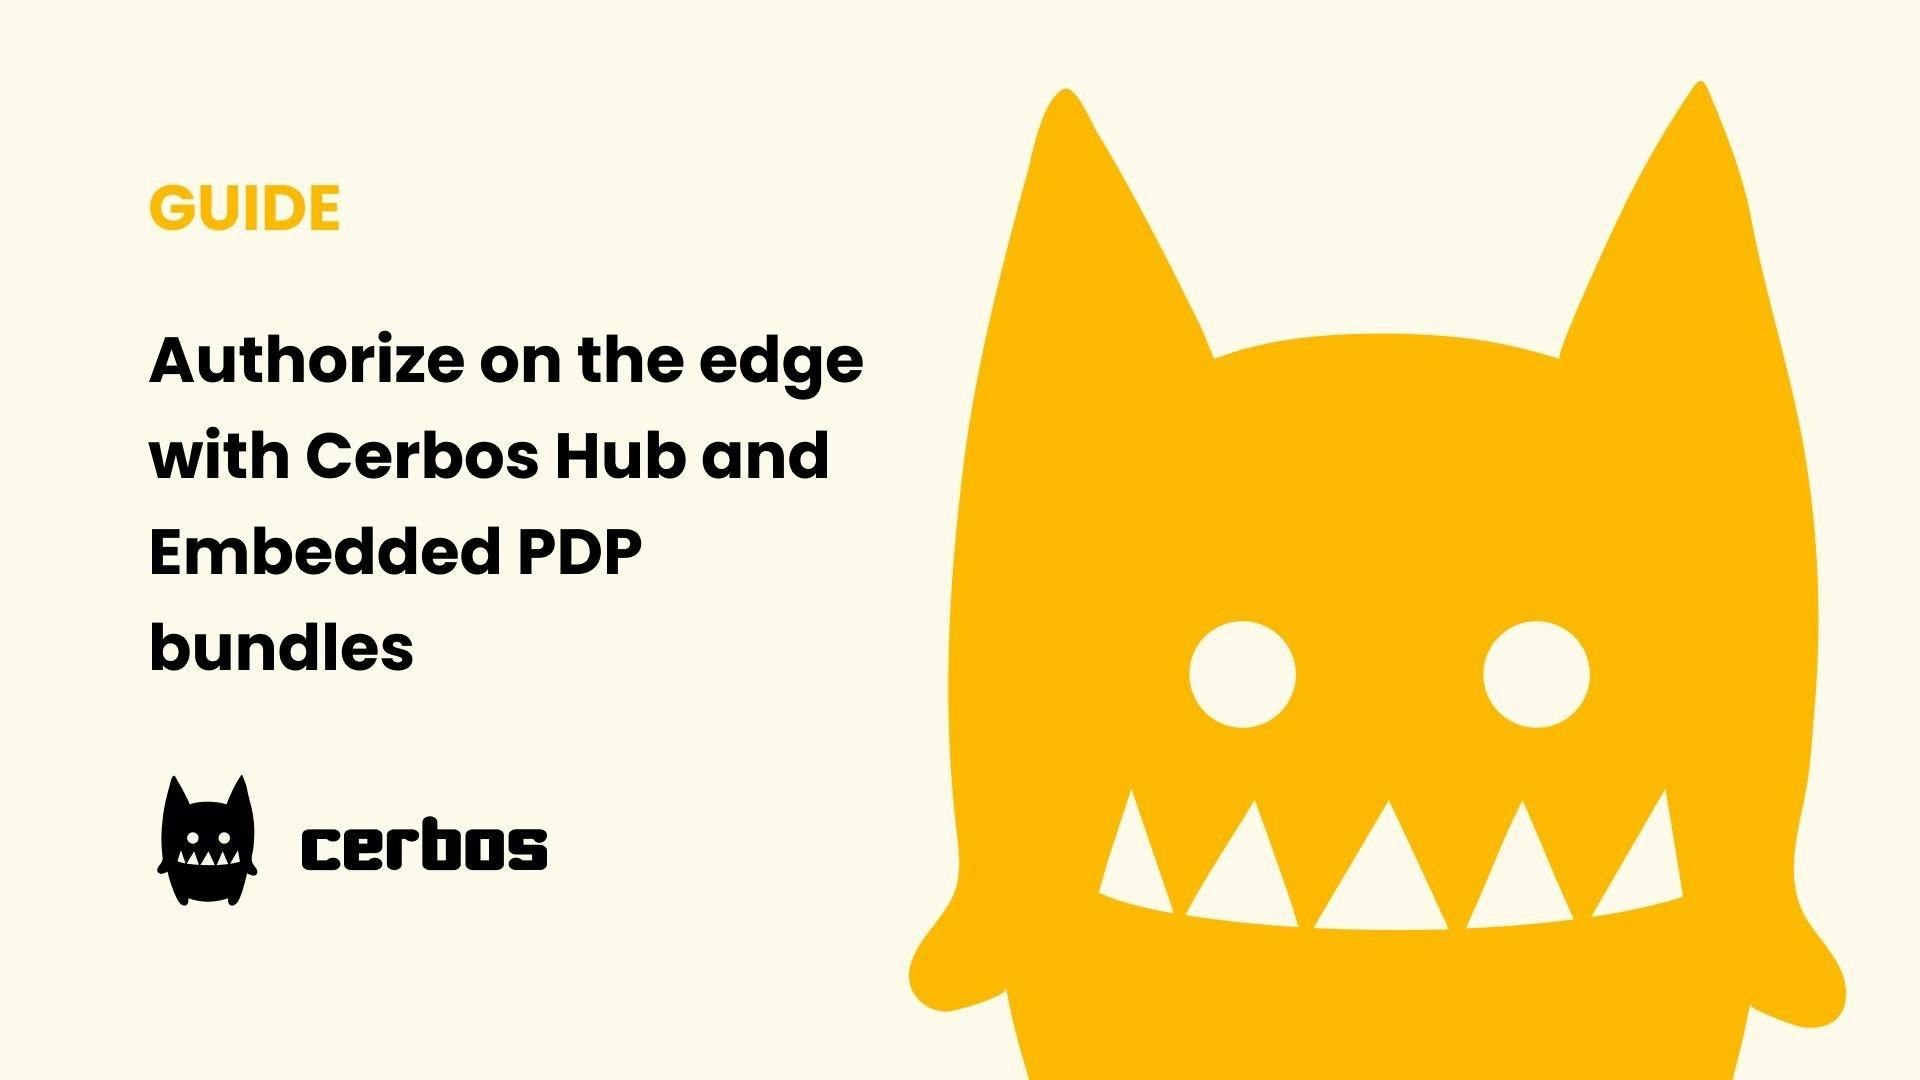 Authorize on the edge with Cerbos Hub and Embedded PDP bundles